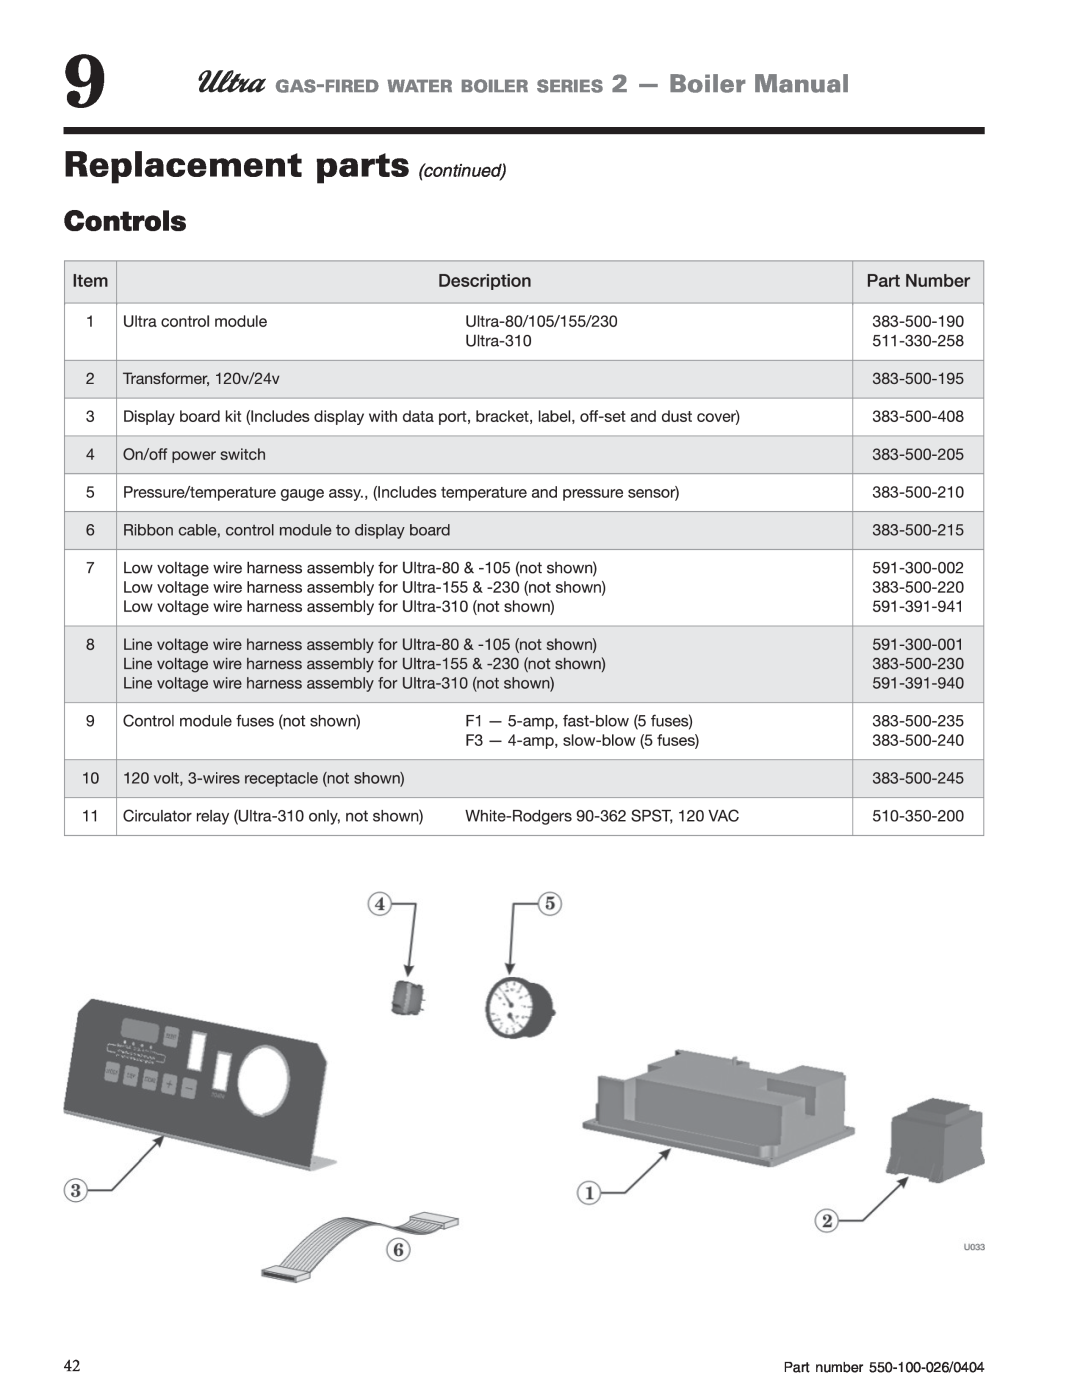 Ultra electronic 230 & -310, 105, 80 Controls, Replacement parts continued, GAS-FIREDWATER BOILER SERIES 2 - Boiler Manual 